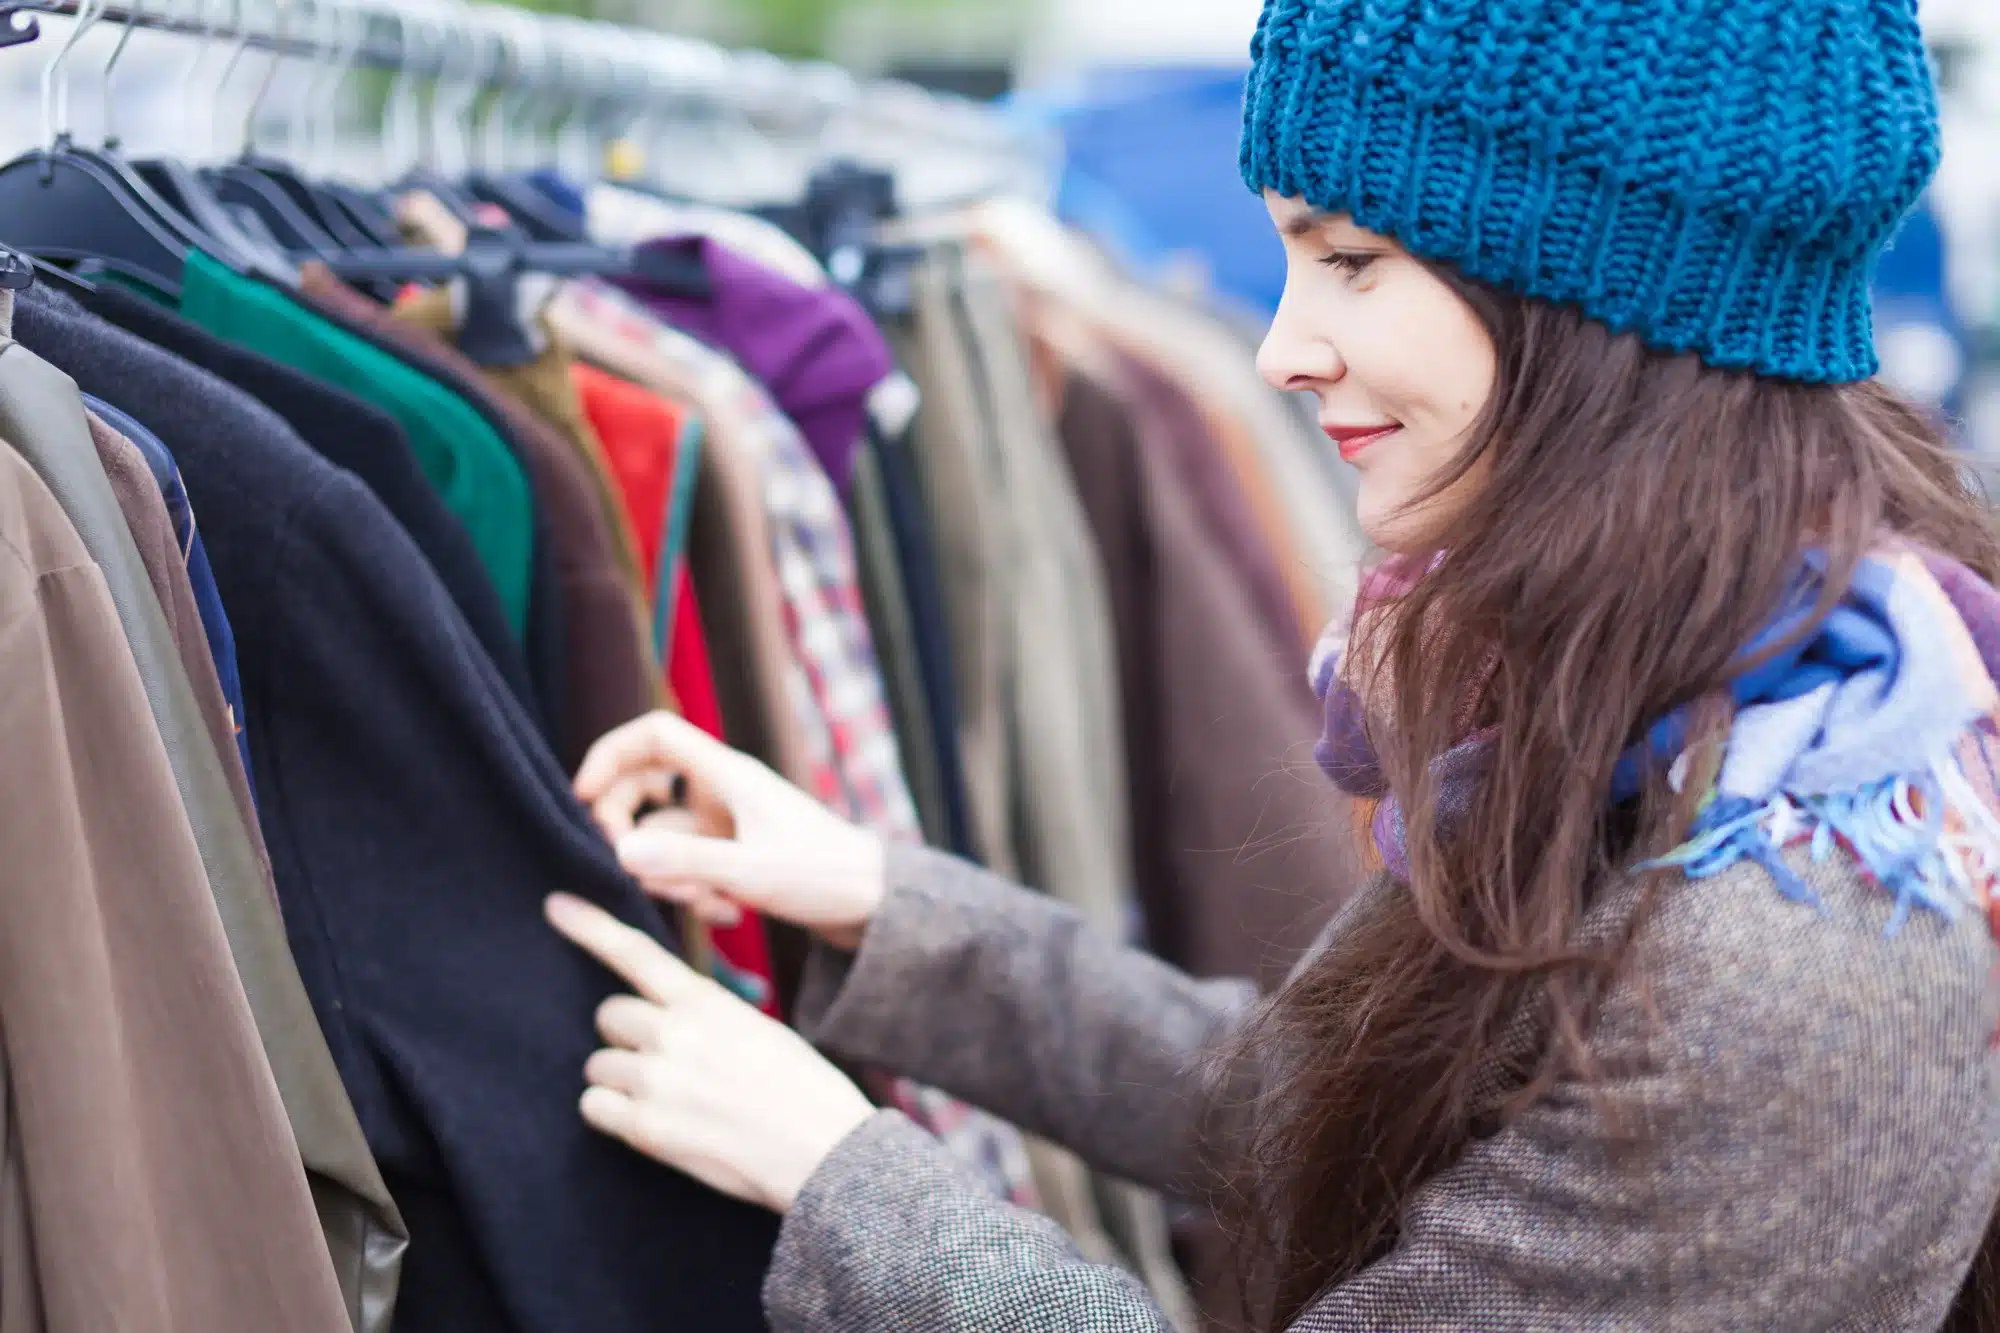 What to look for at thrift stores